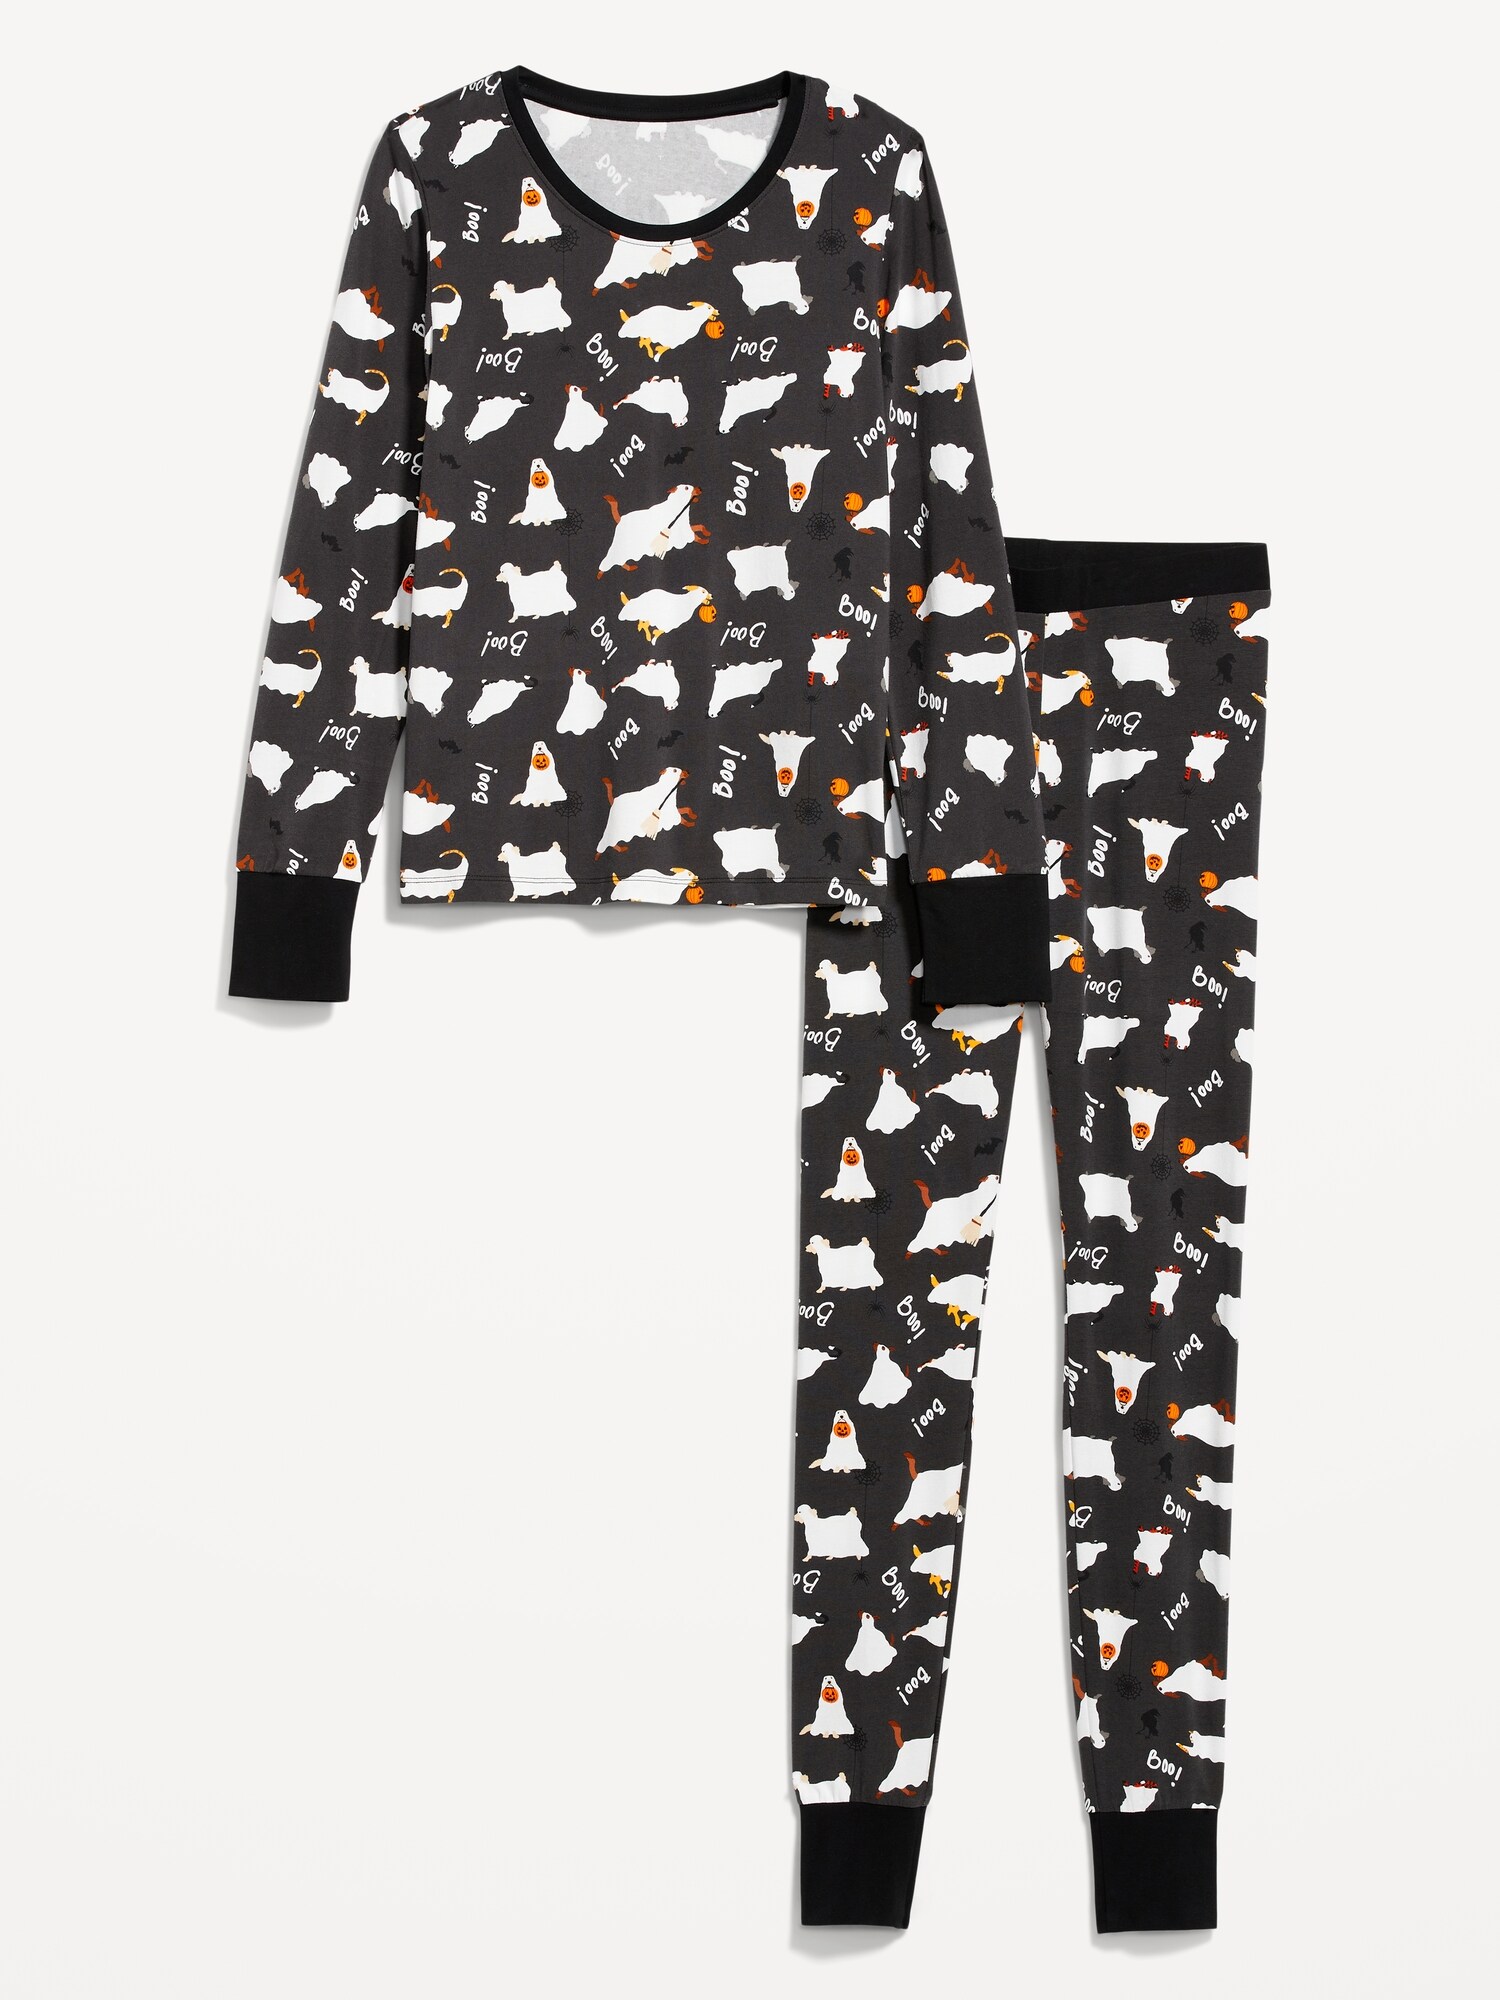 Petco's Halloween Collection Features Matching Pajamas for You